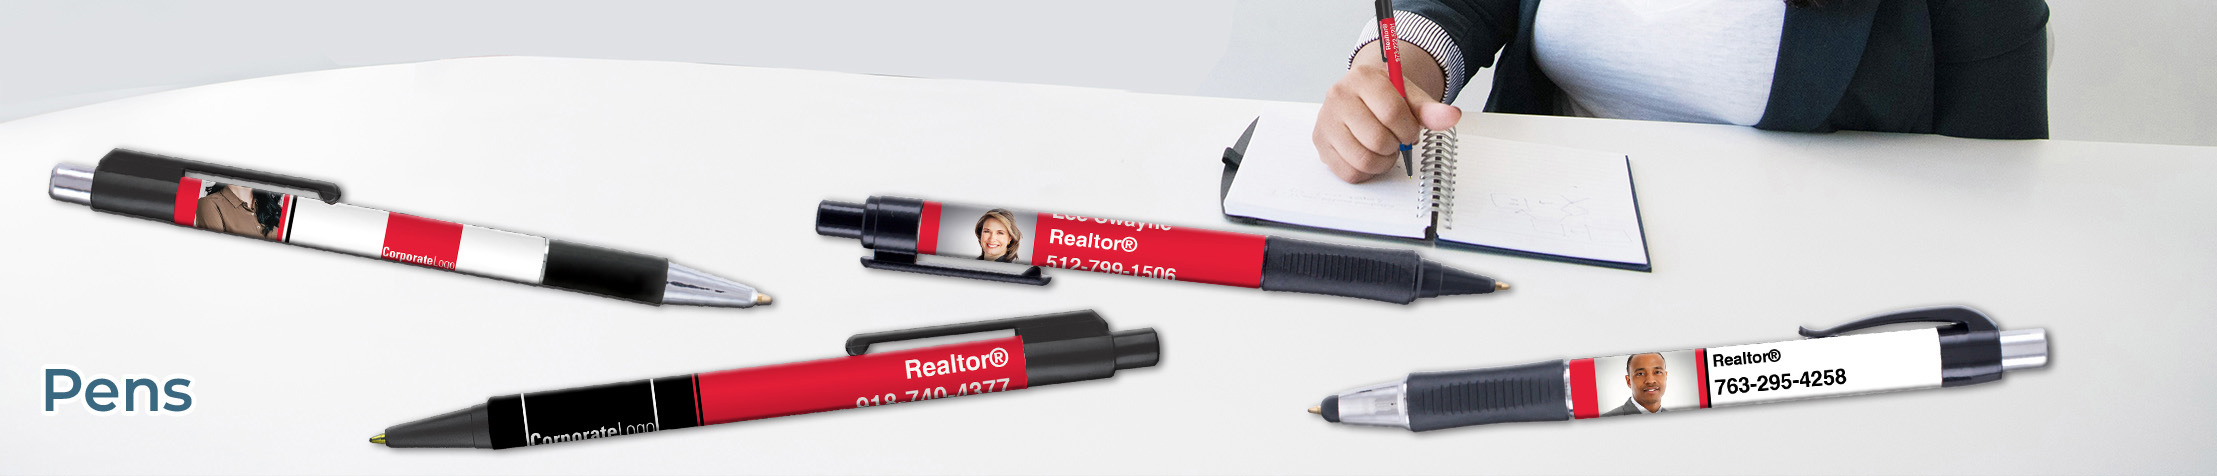 Real Living Real Estate Pens - Real Living Real Estate  personalized realtor promotional products | BestPrintBuy.com